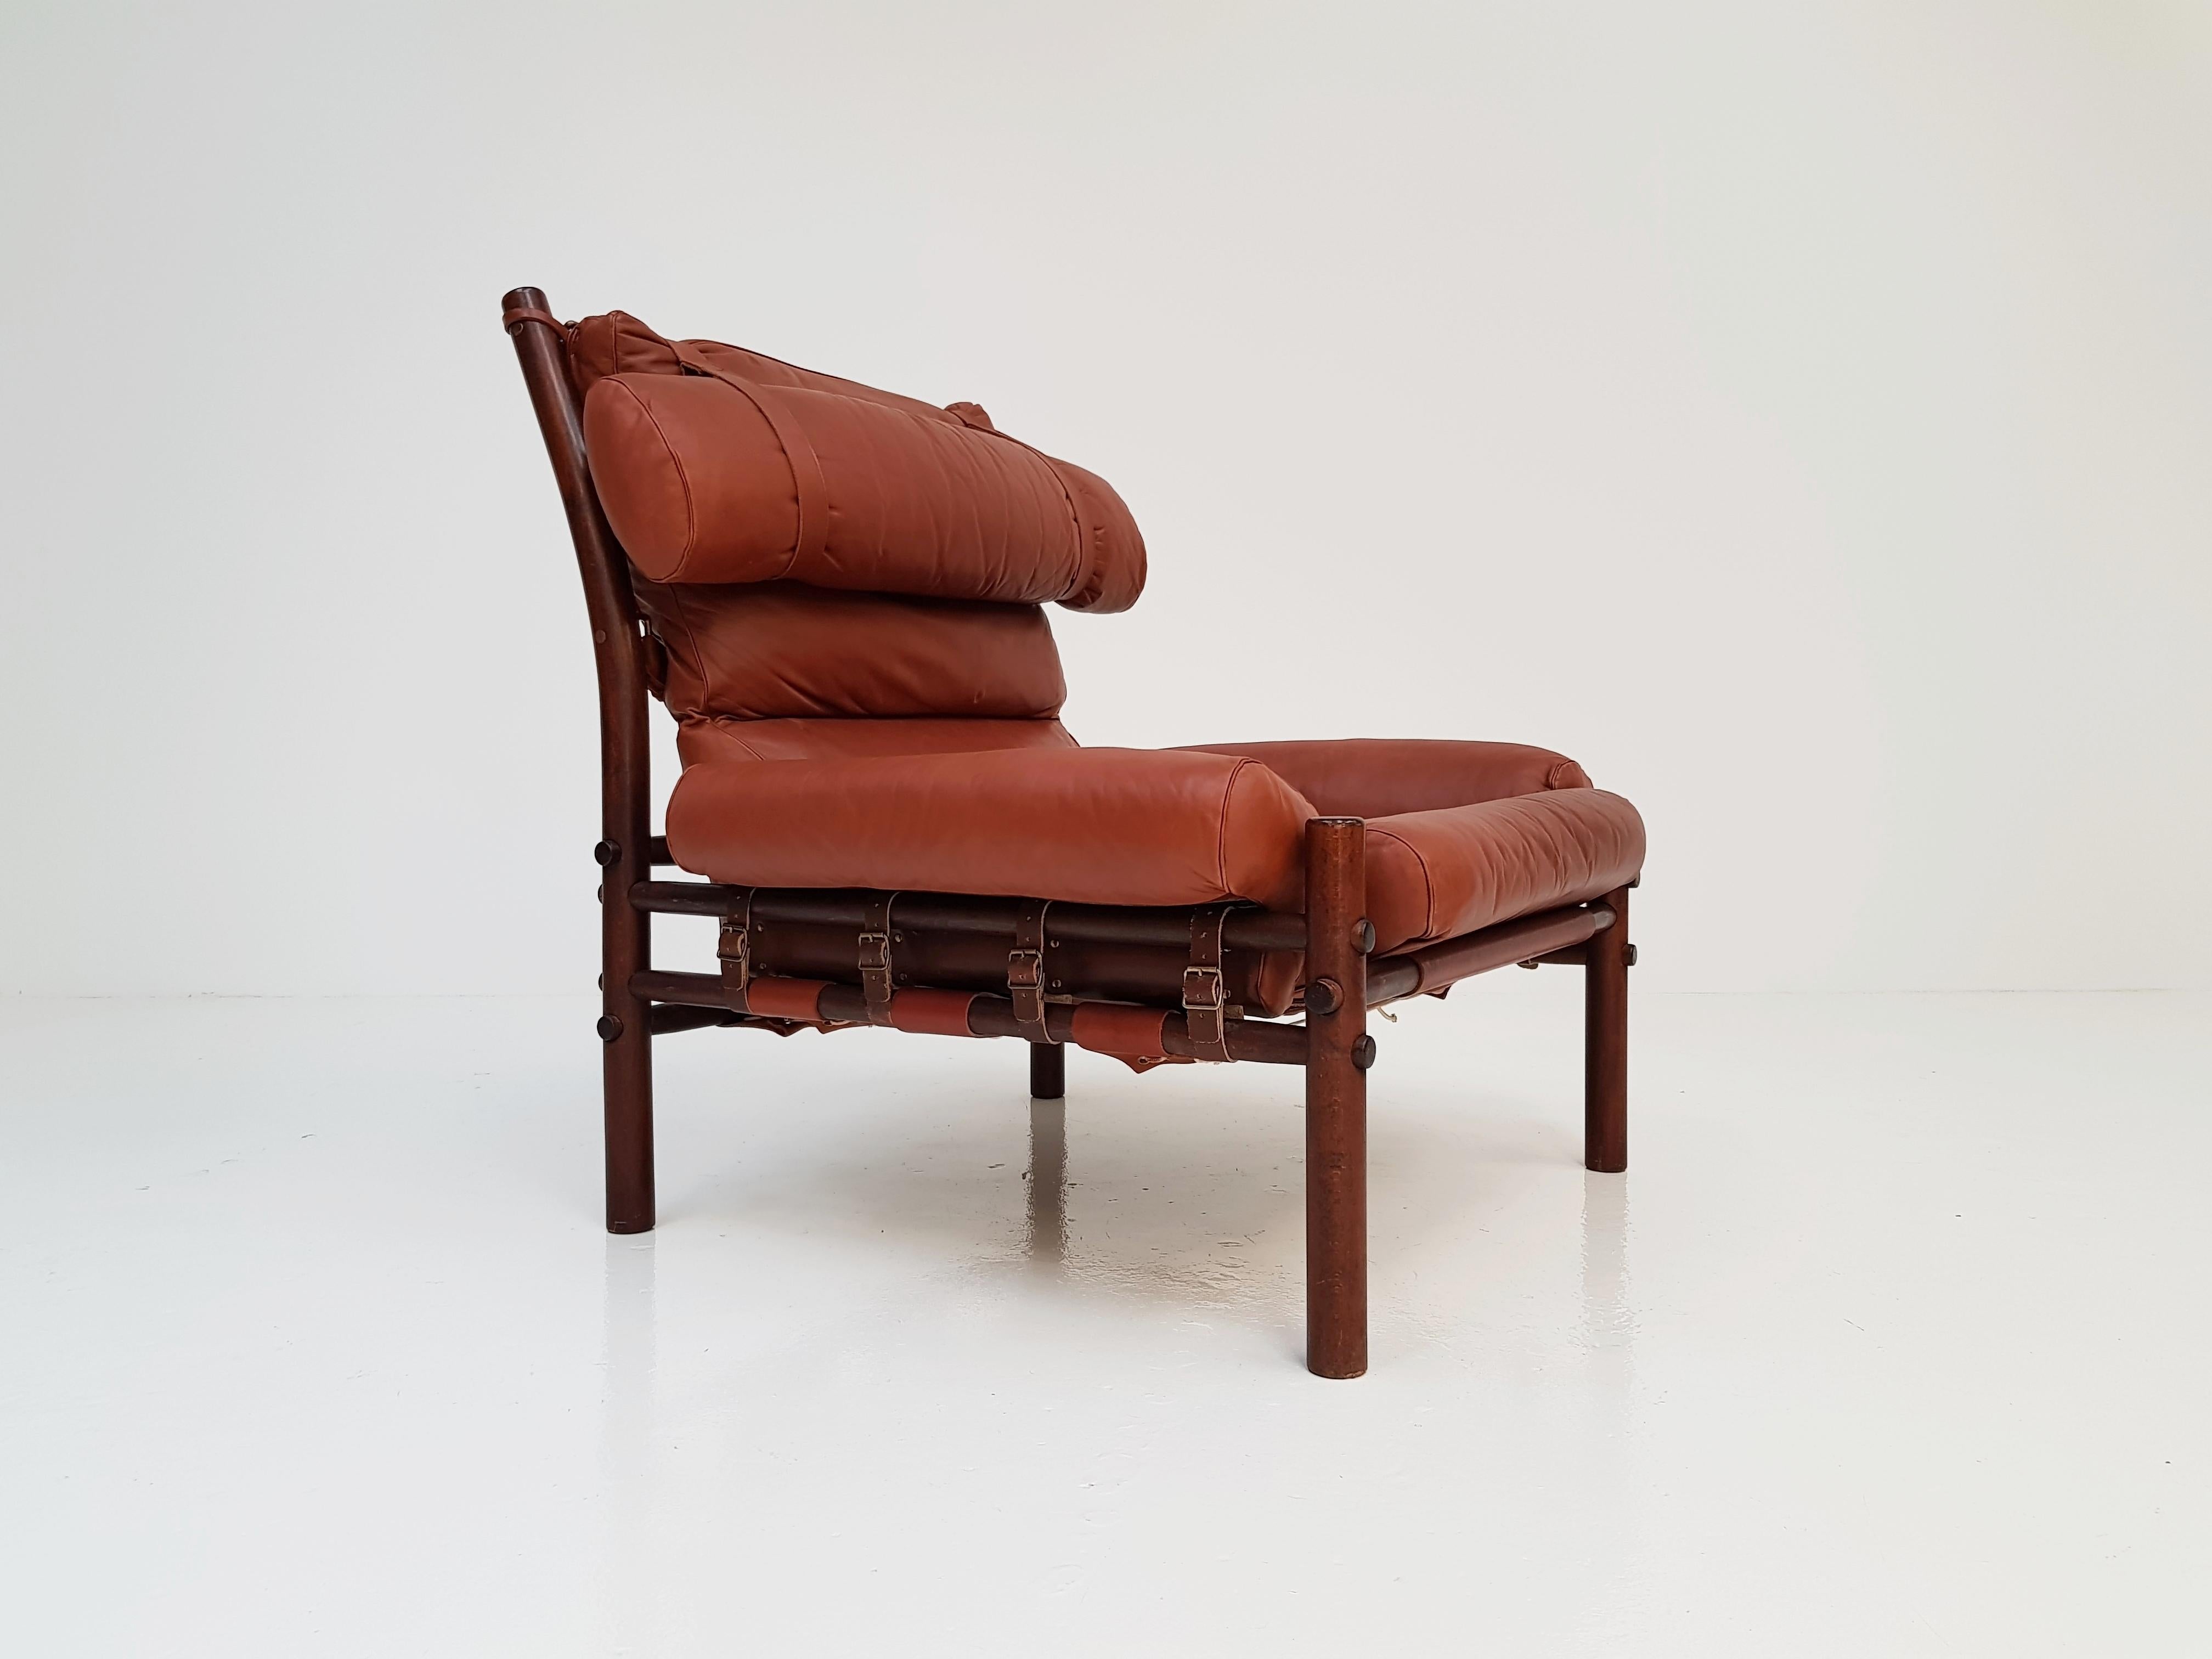 20th Century Inca Chair and Footstool by Swedish Designer Arne Norell for Norell Möbler